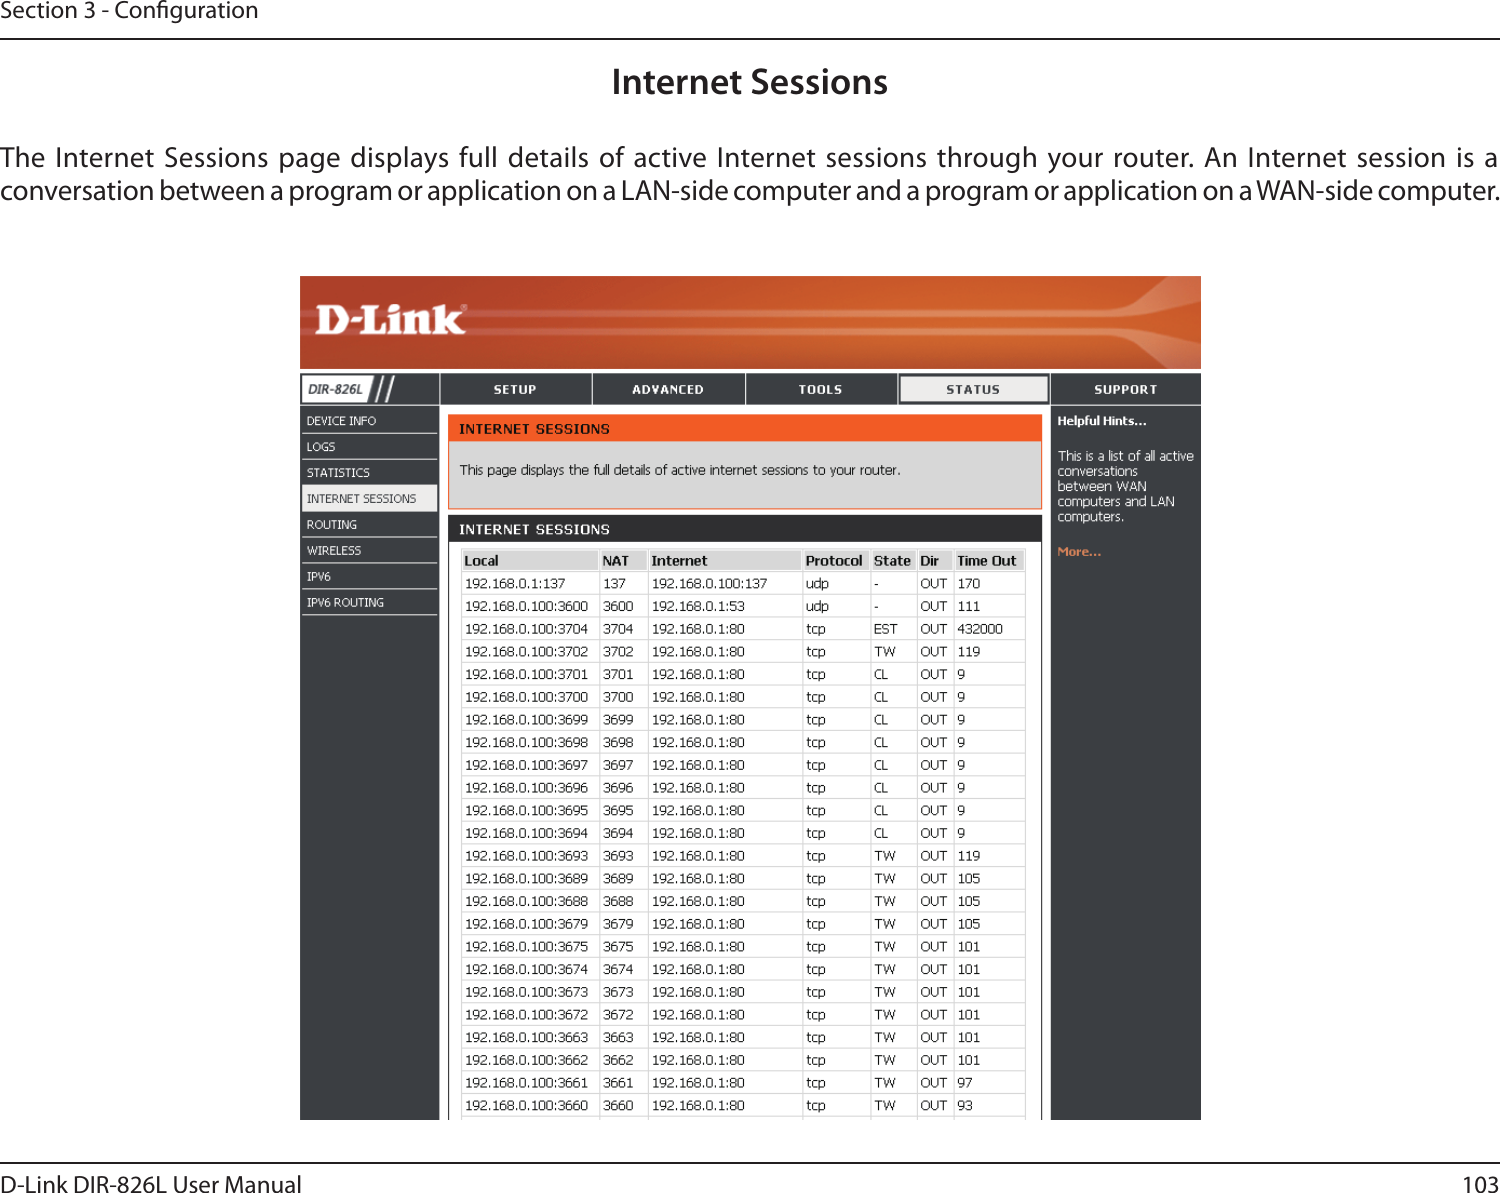 103D-Link DIR-826L User ManualSection 3 - CongurationInternet SessionsThe Internet Sessions page displays full details of active Internet sessions through your router. An Internet session is a conversation between a program or application on a LAN-side computer and a program or application on a WAN-side computer. 